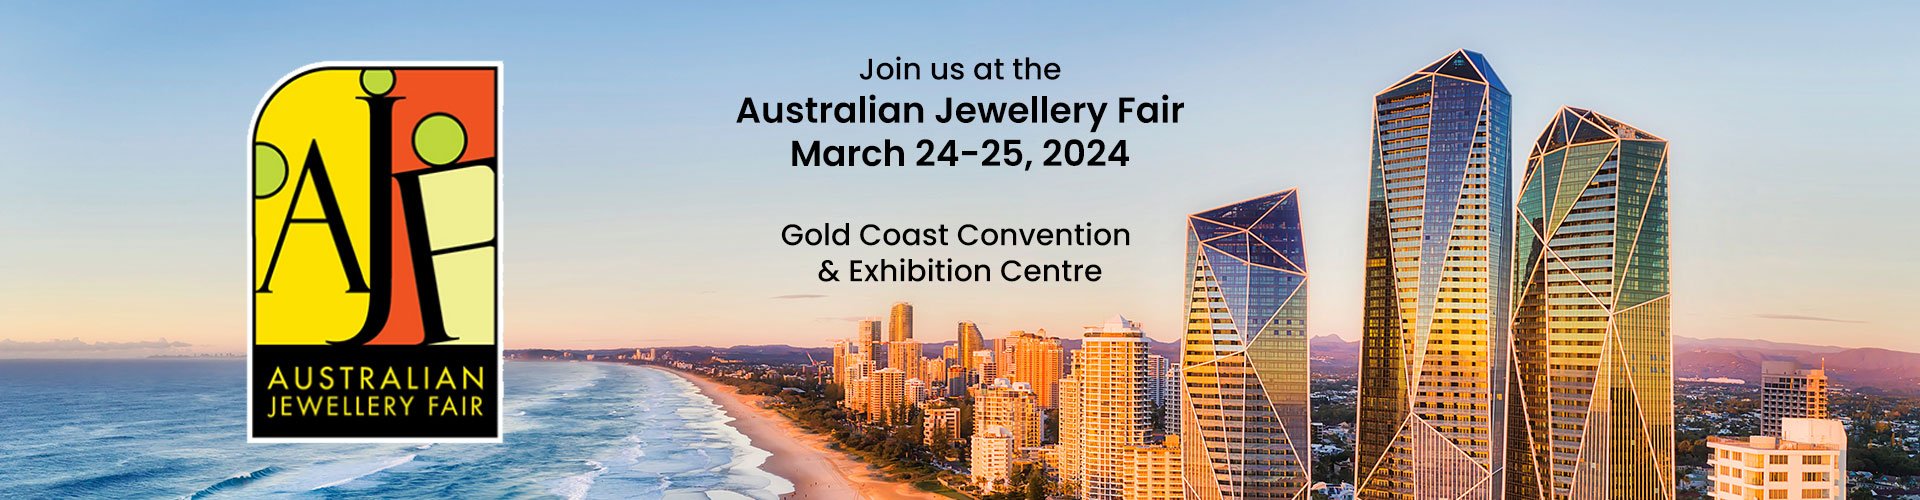 Join us at the Australian Jewellery Fair on March 24-25, 2024 Sunday: 10am – 5pm  Monday: 10am – 3pm  Gold Coast Convention & Exhibition Centre